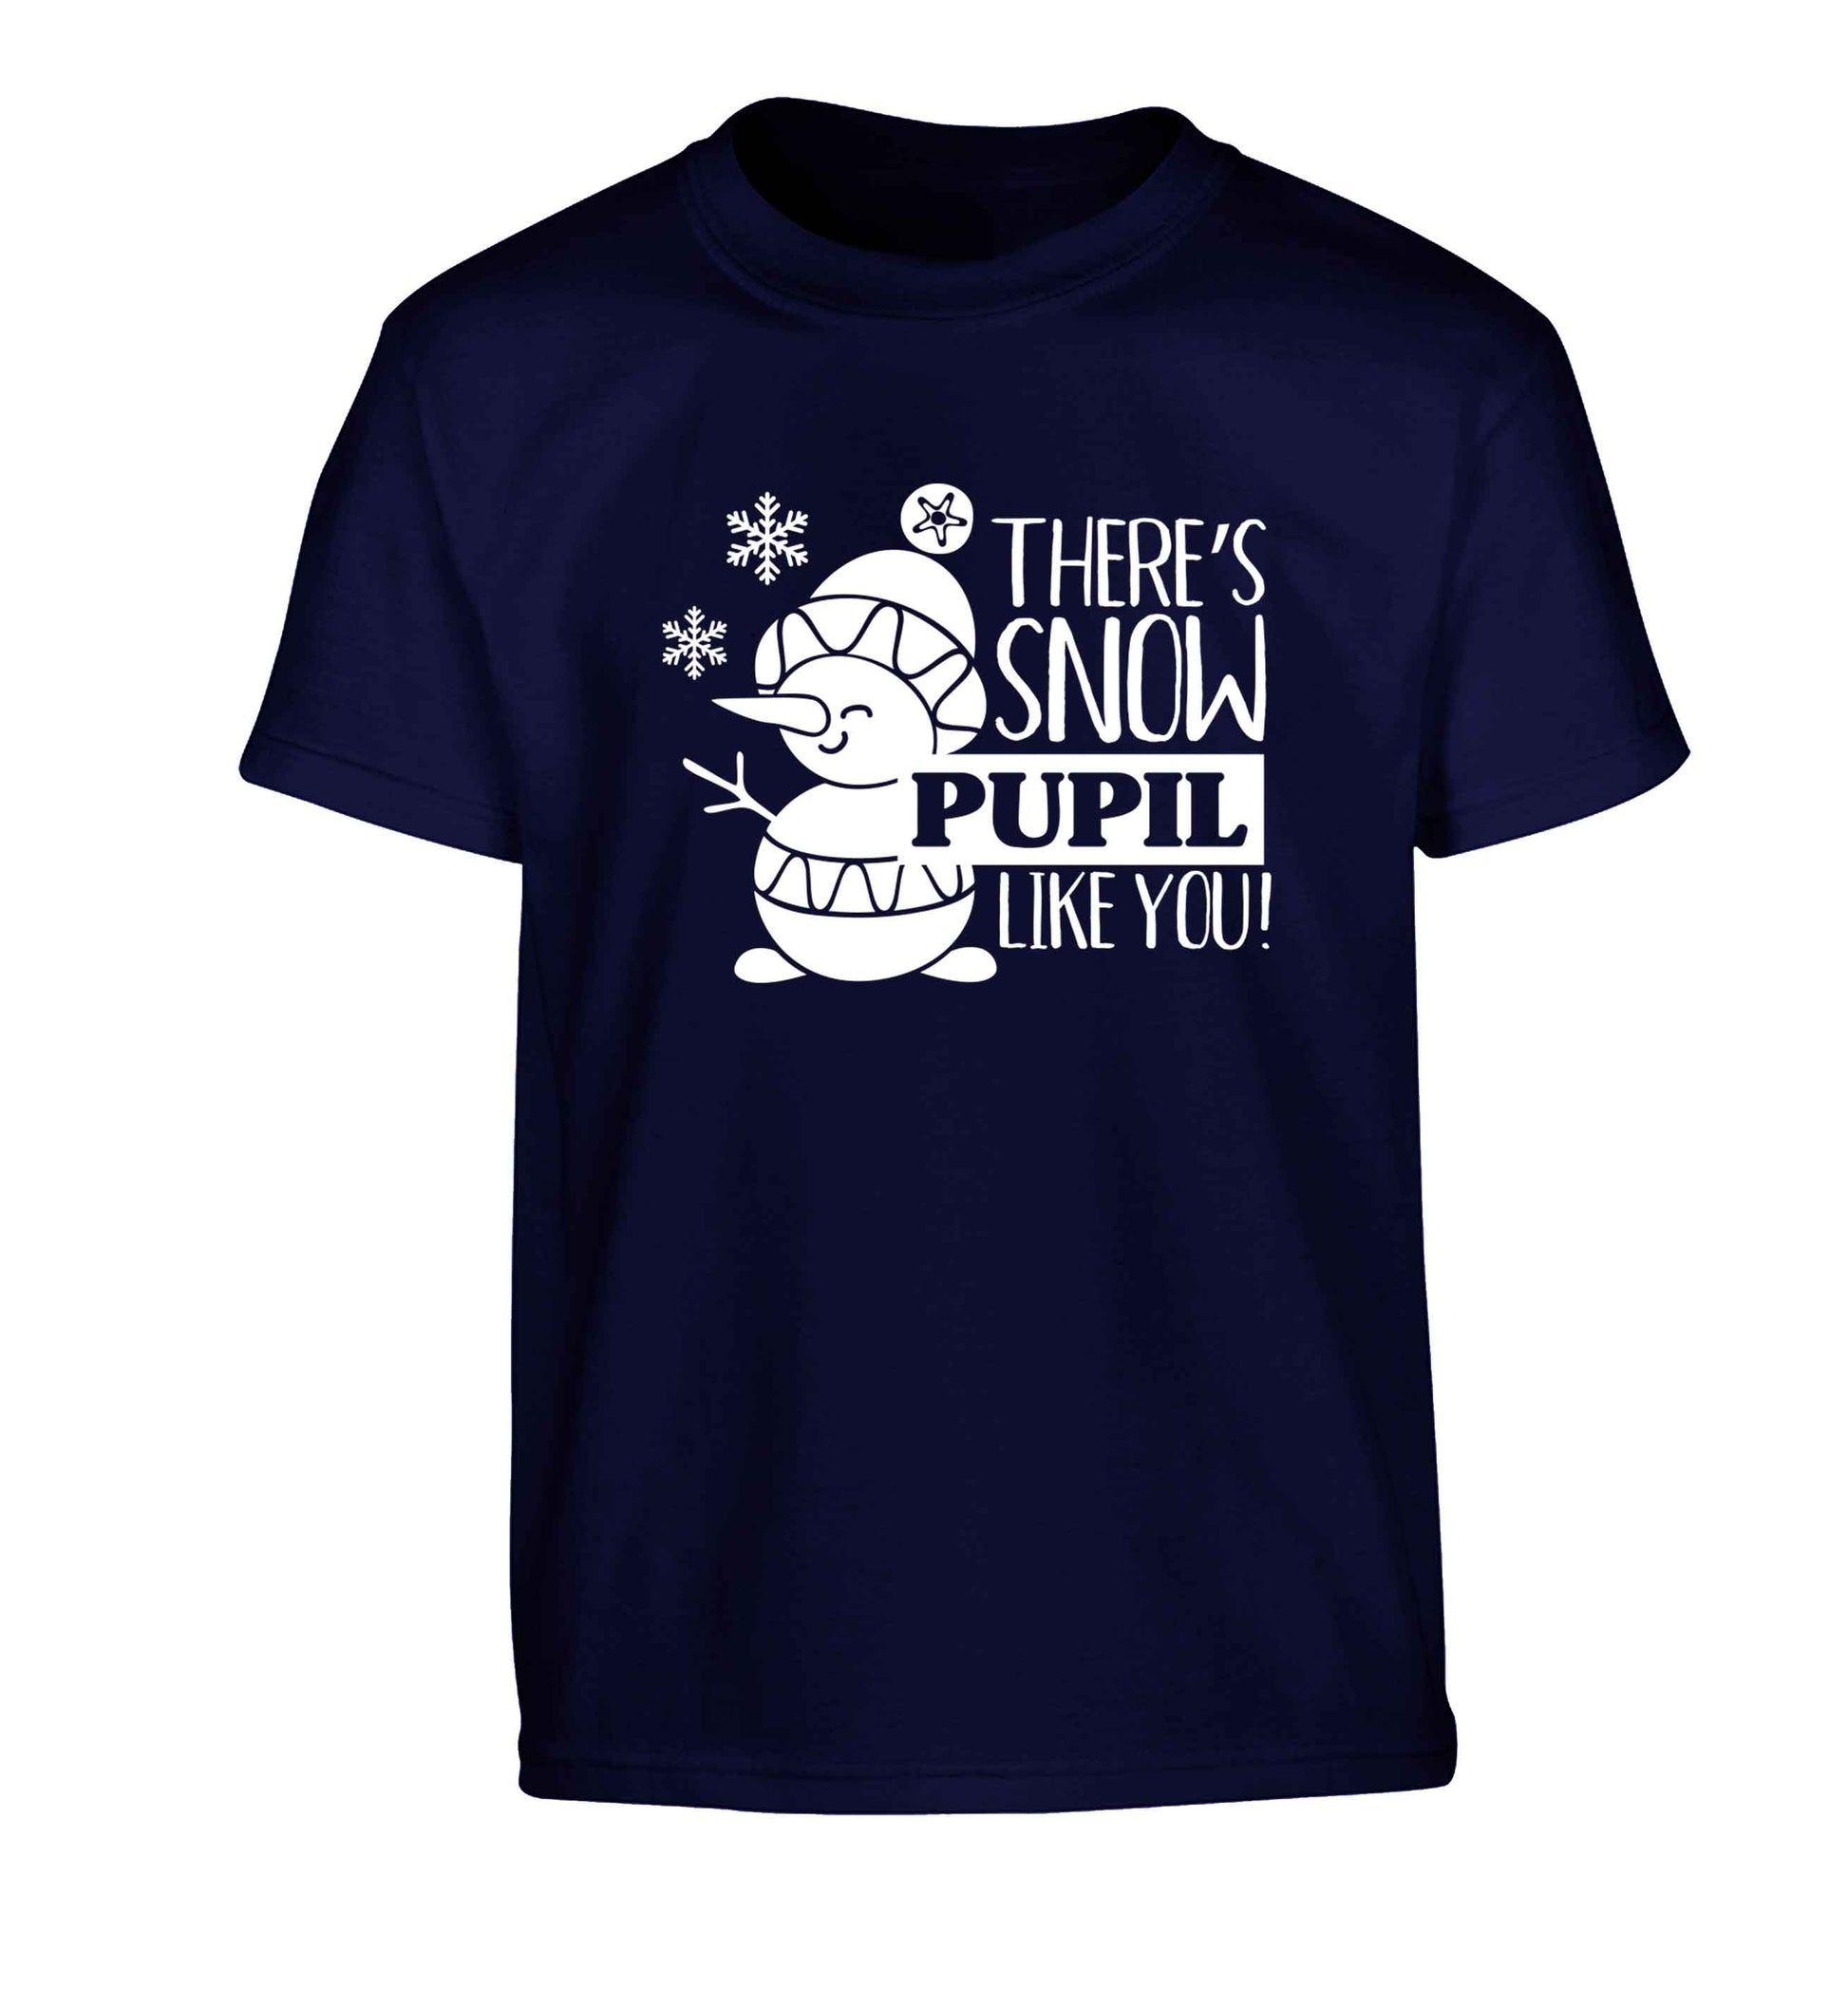 There's snow pupil like you Children's navy Tshirt 12-13 Years